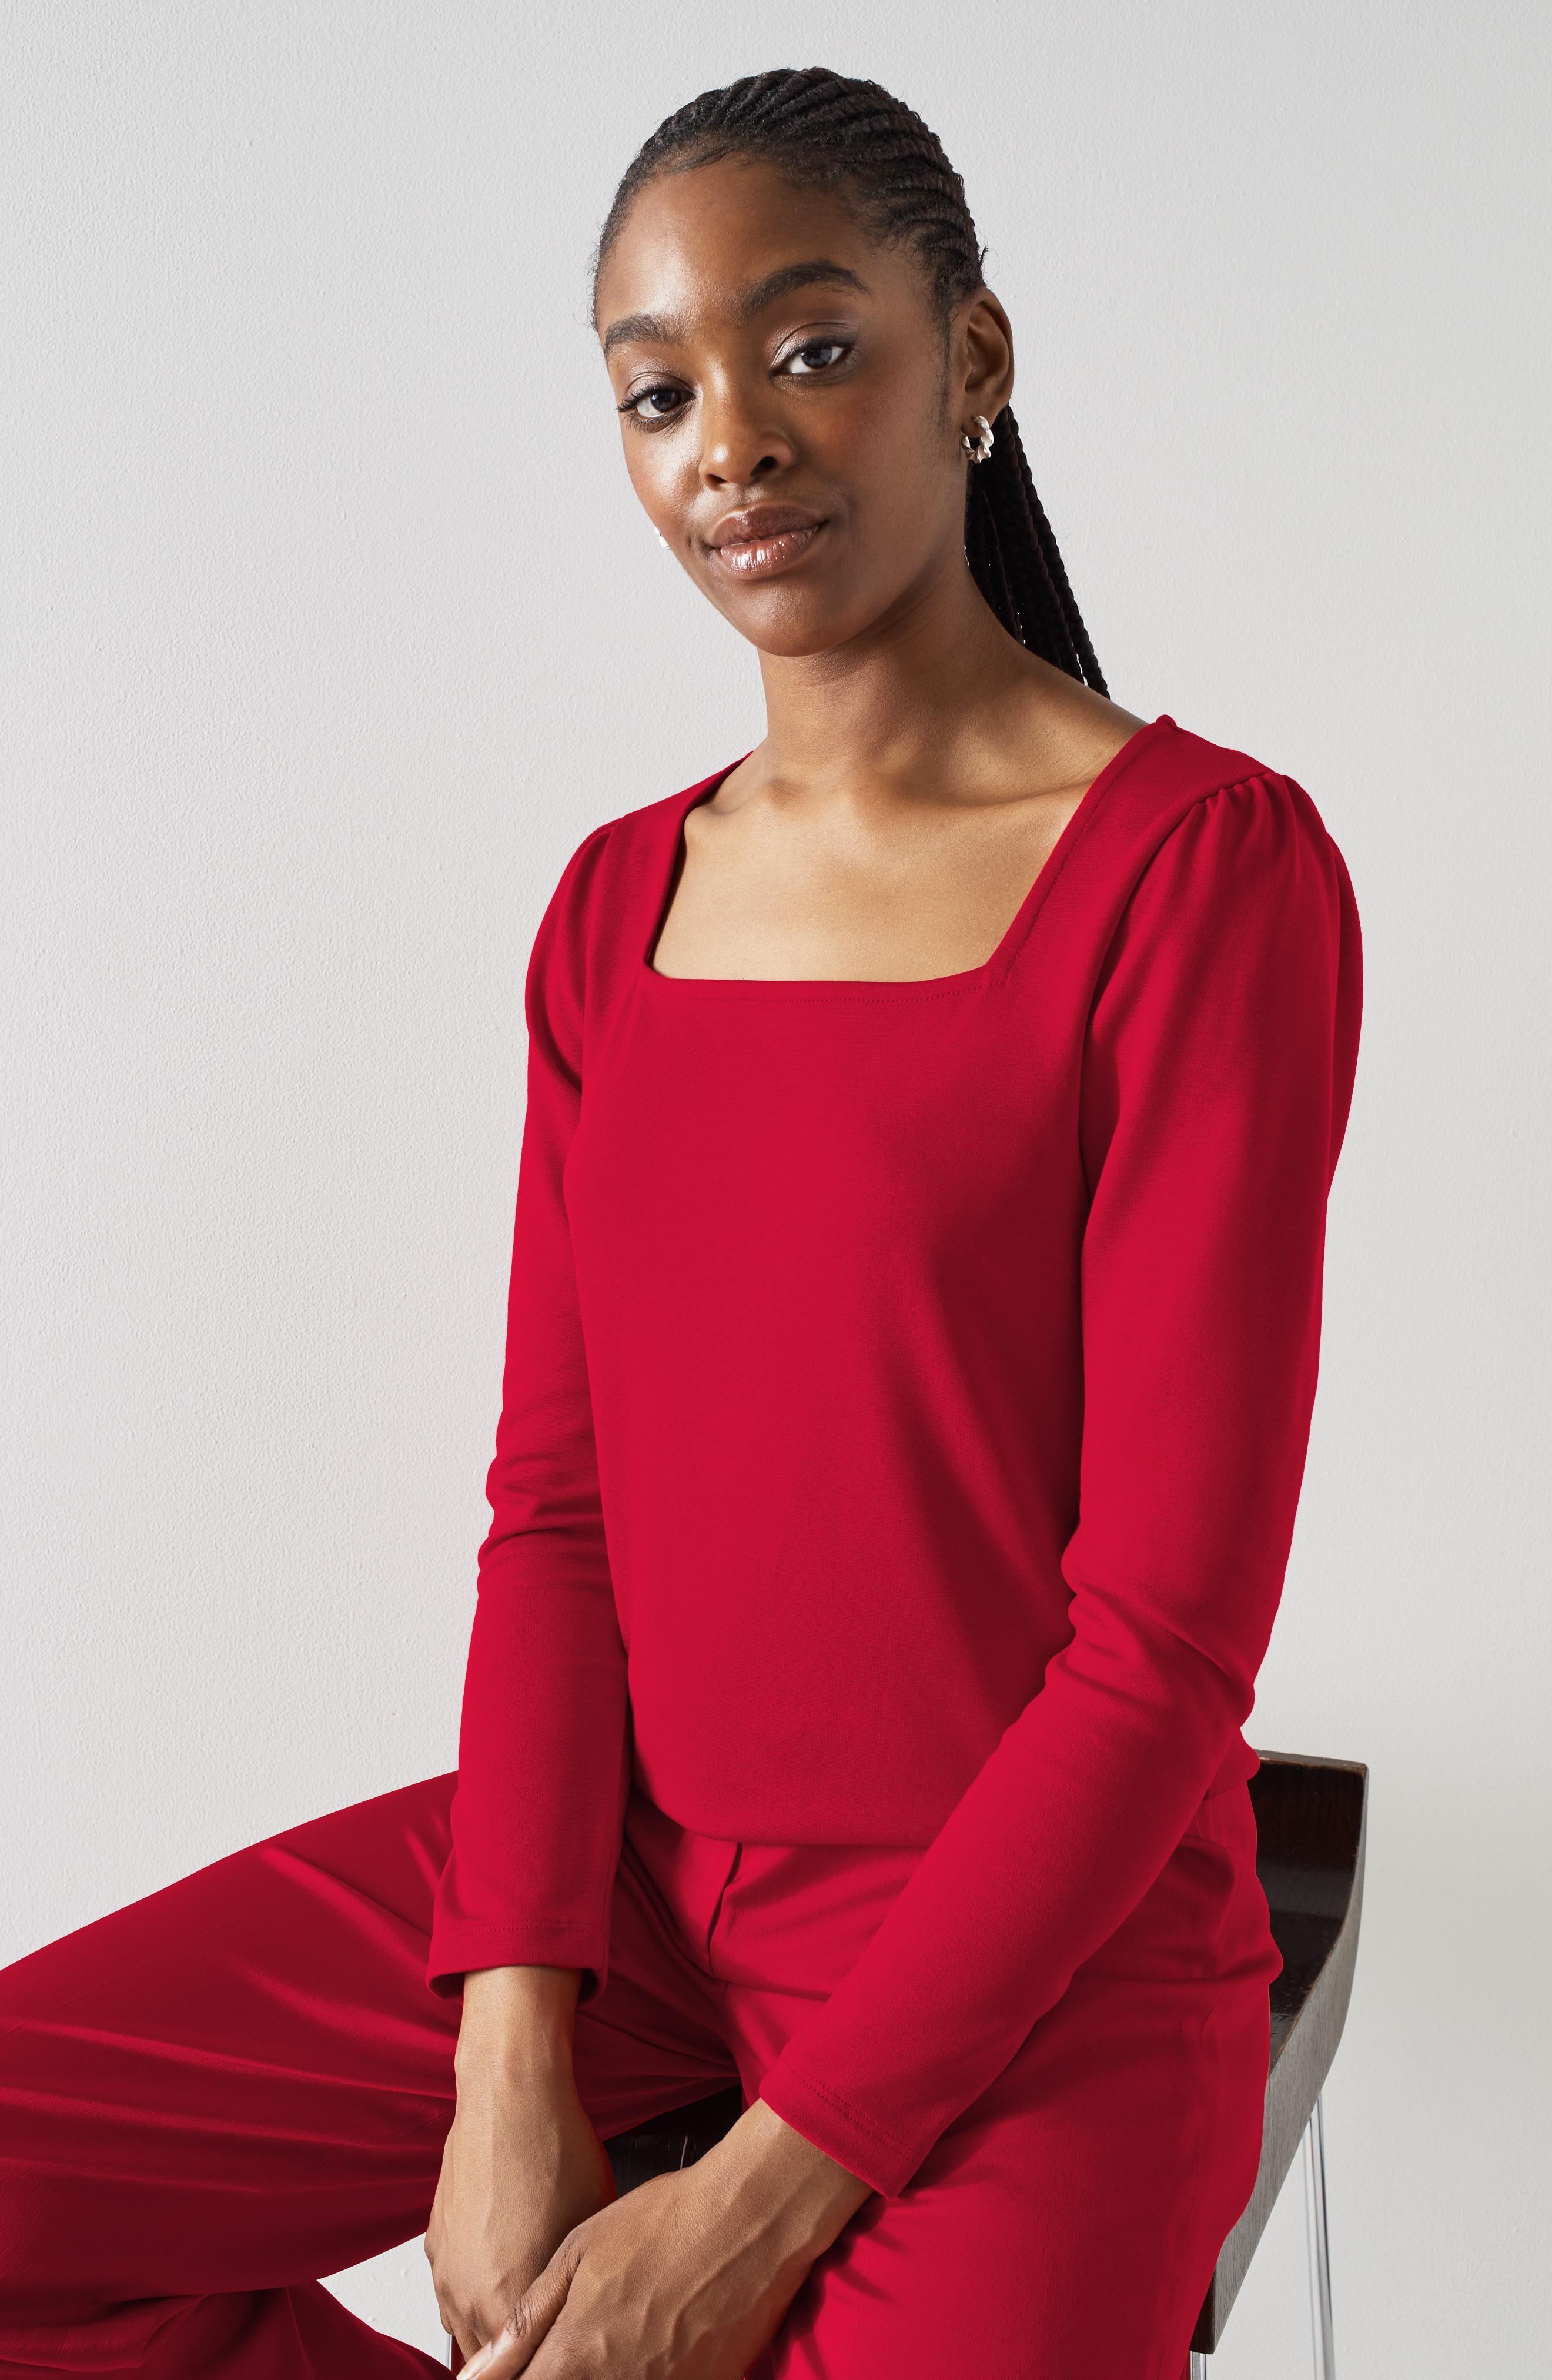 L.K.Bennett Alex Red  Square Neck Top with LENZING ECOVERO viscose Cherry, Cherry